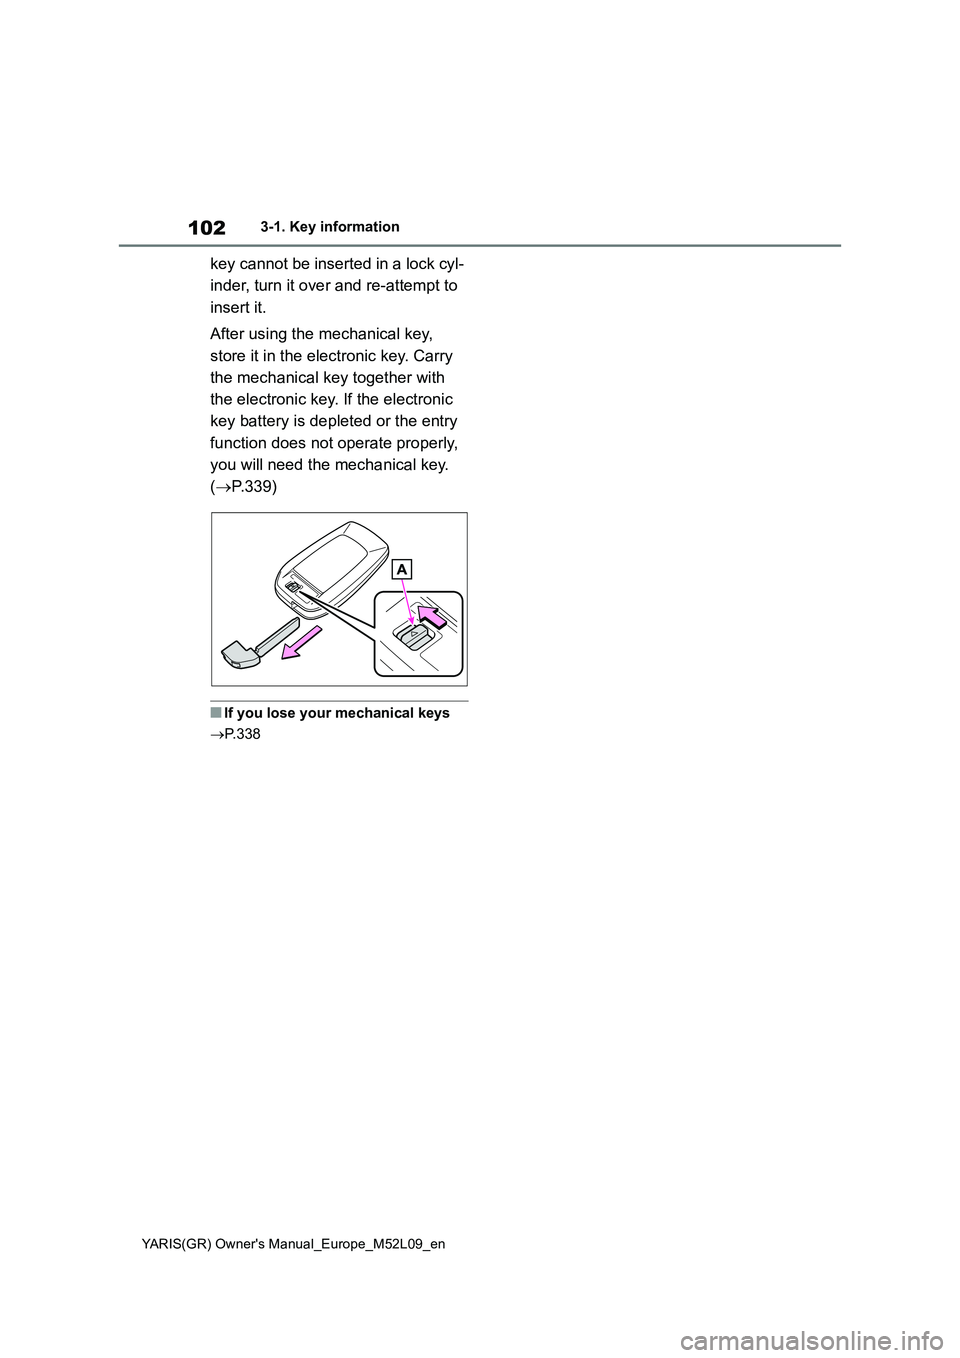 TOYOTA GR YARIS 2020  Owners Manual (in English) 102
YARIS(GR) Owners Manual_Europe_M52L09_en
3-1. Key information
key cannot be inserted in a lock cyl- 
inder, turn it over and re-attempt to  
insert it. 
After using the mechanical key,  
store it